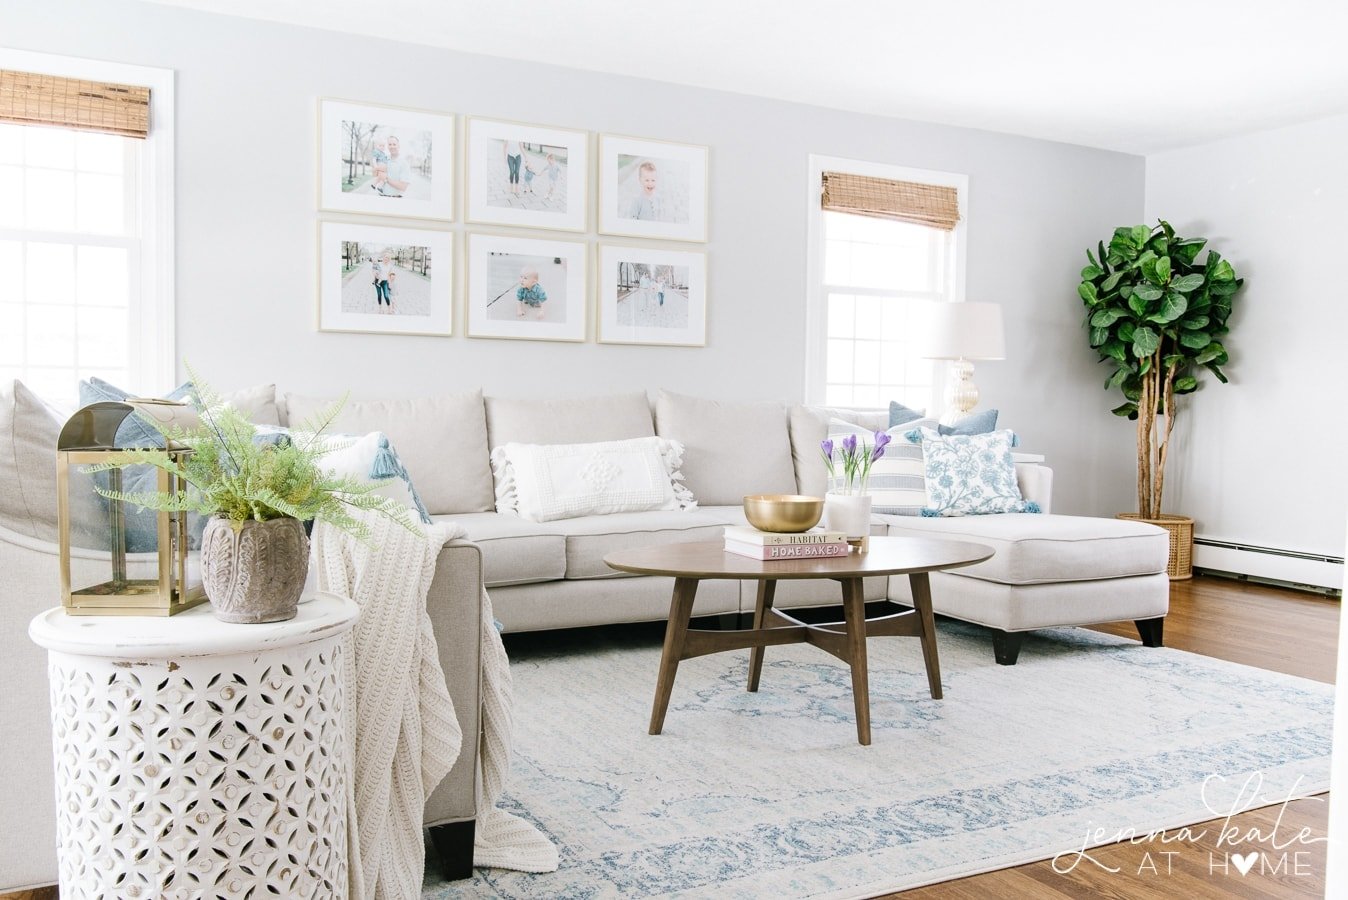 A wide view of the living room, with large sofa, oval coffee table, wooden side table and large blue & white rug